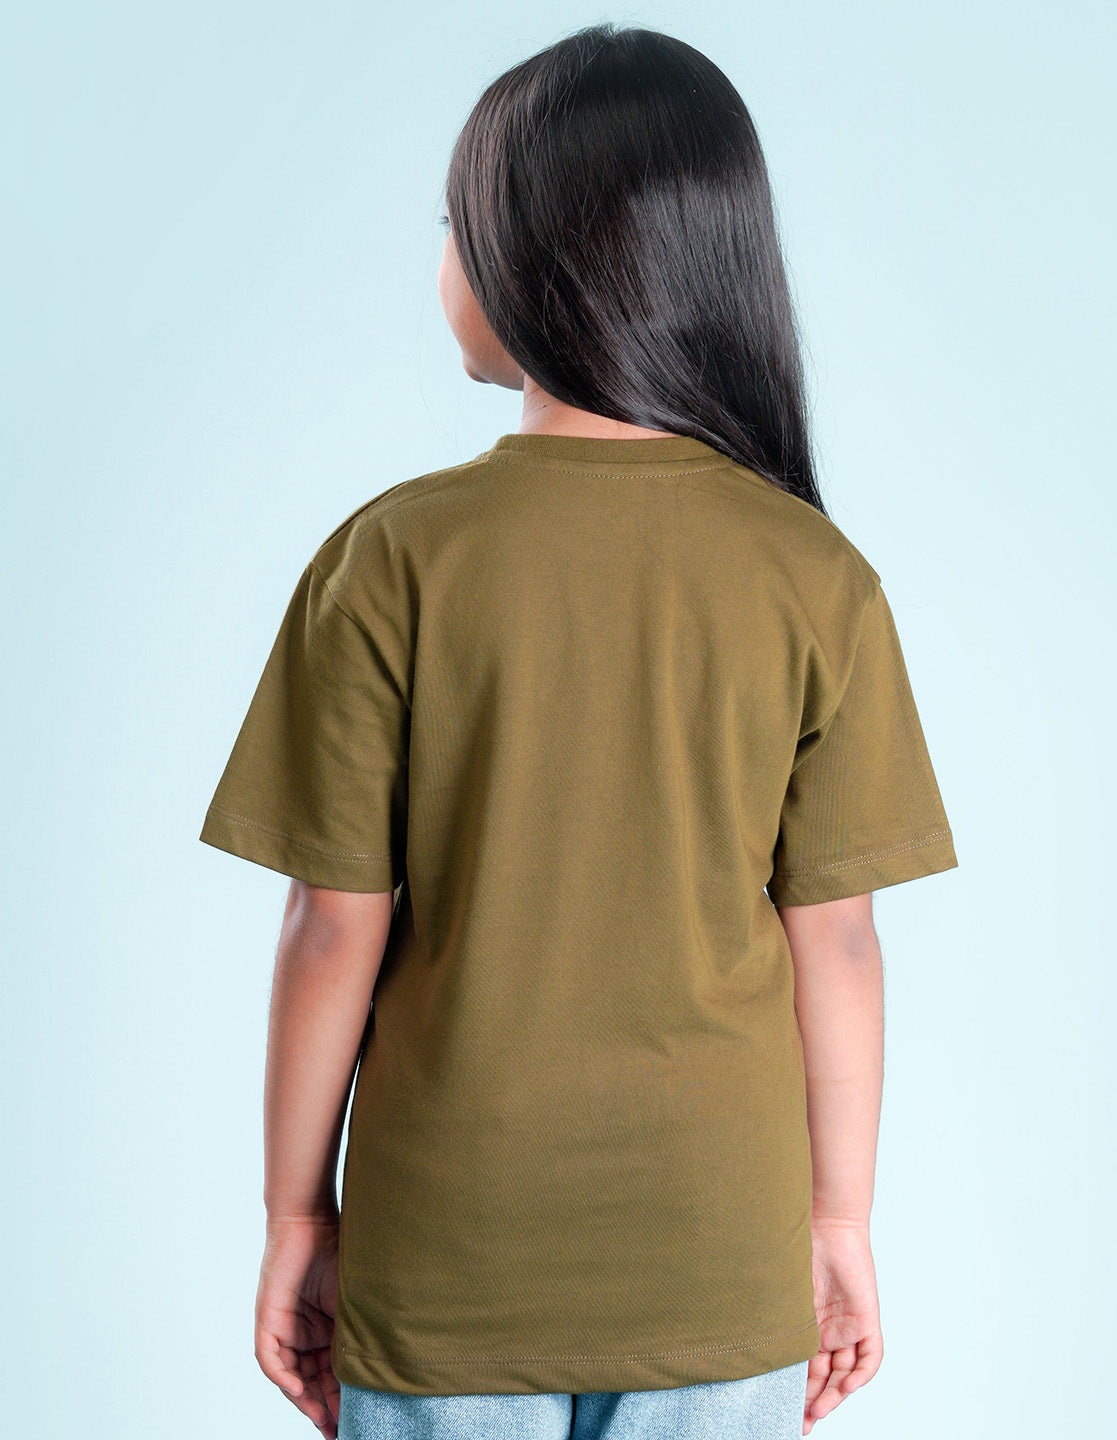 Nusyl Girls Solid Olive Oversized T-shirt